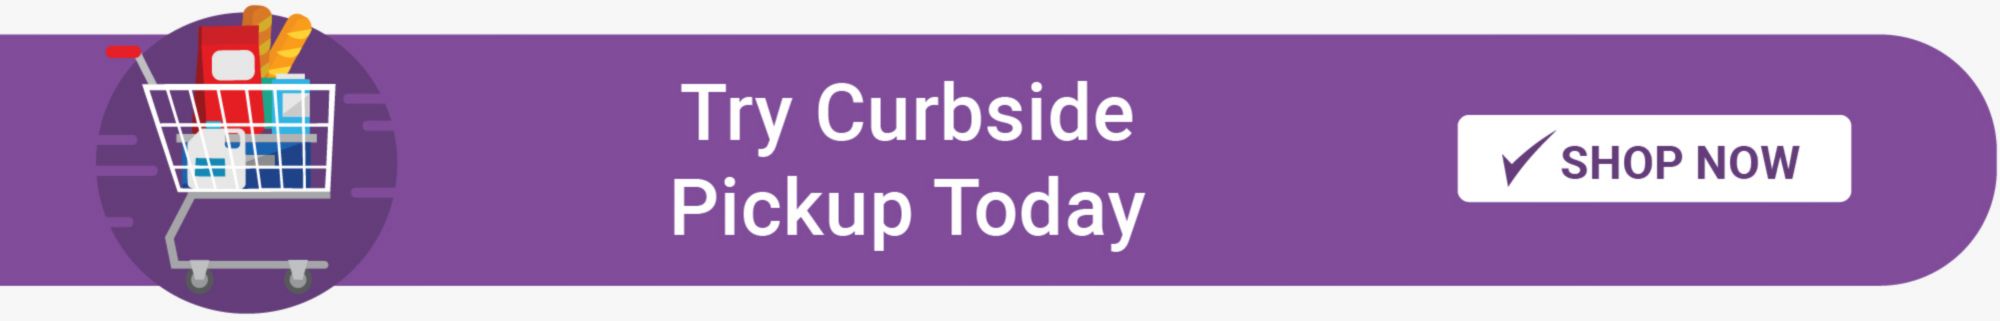 Try Curbside Pickup Today. Show Now.